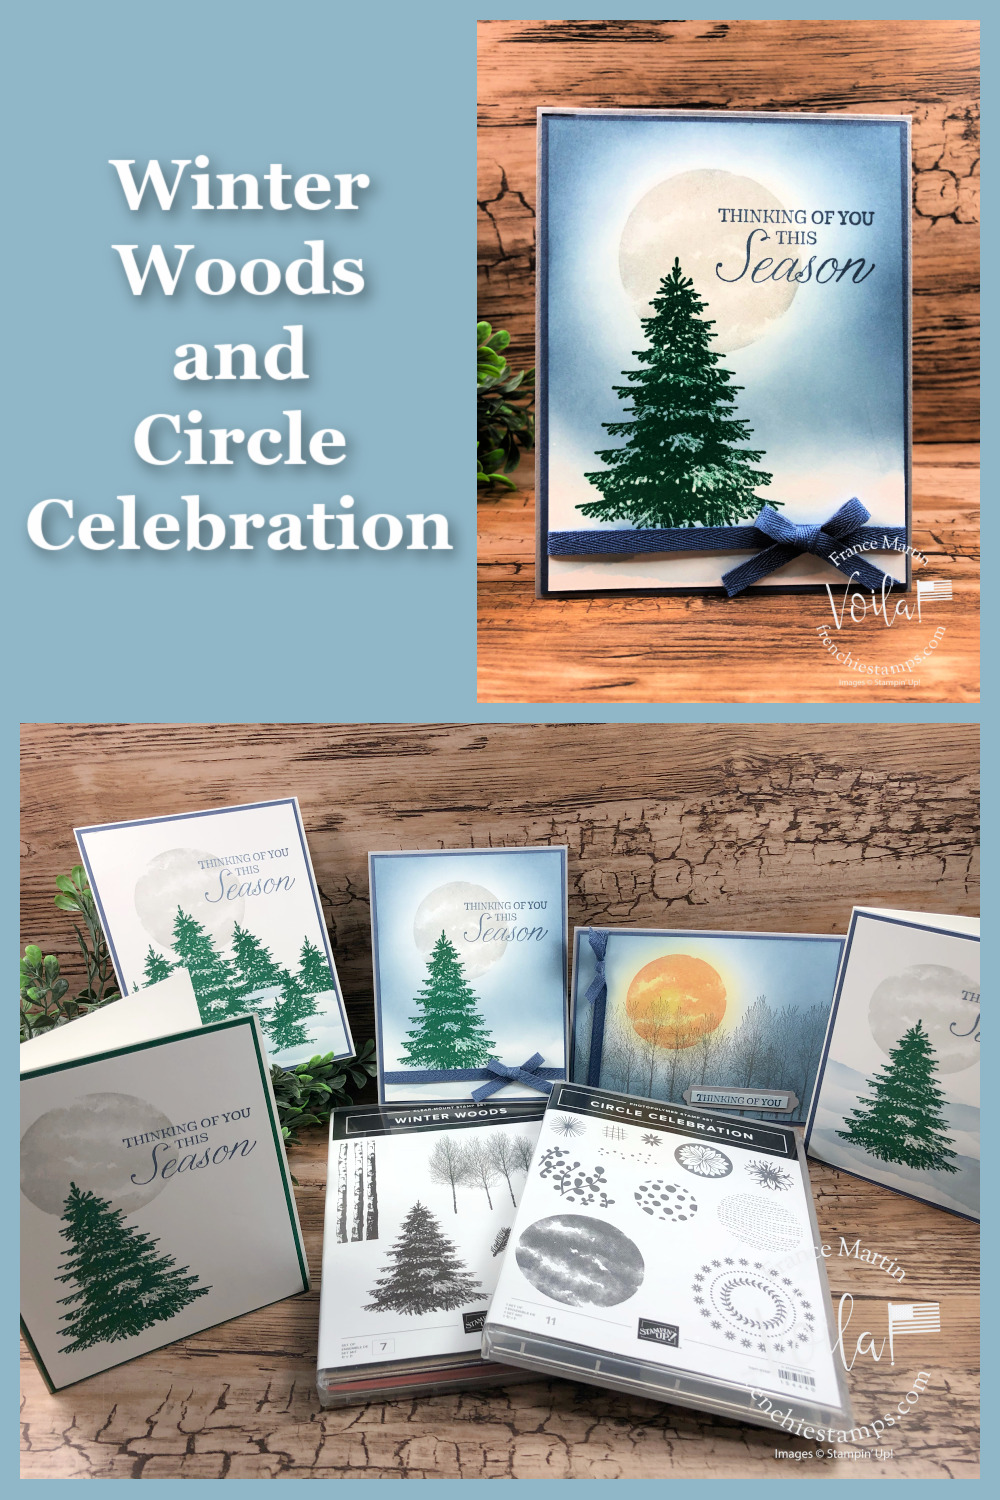 Scenery With Winter Woods and Circle Celebration